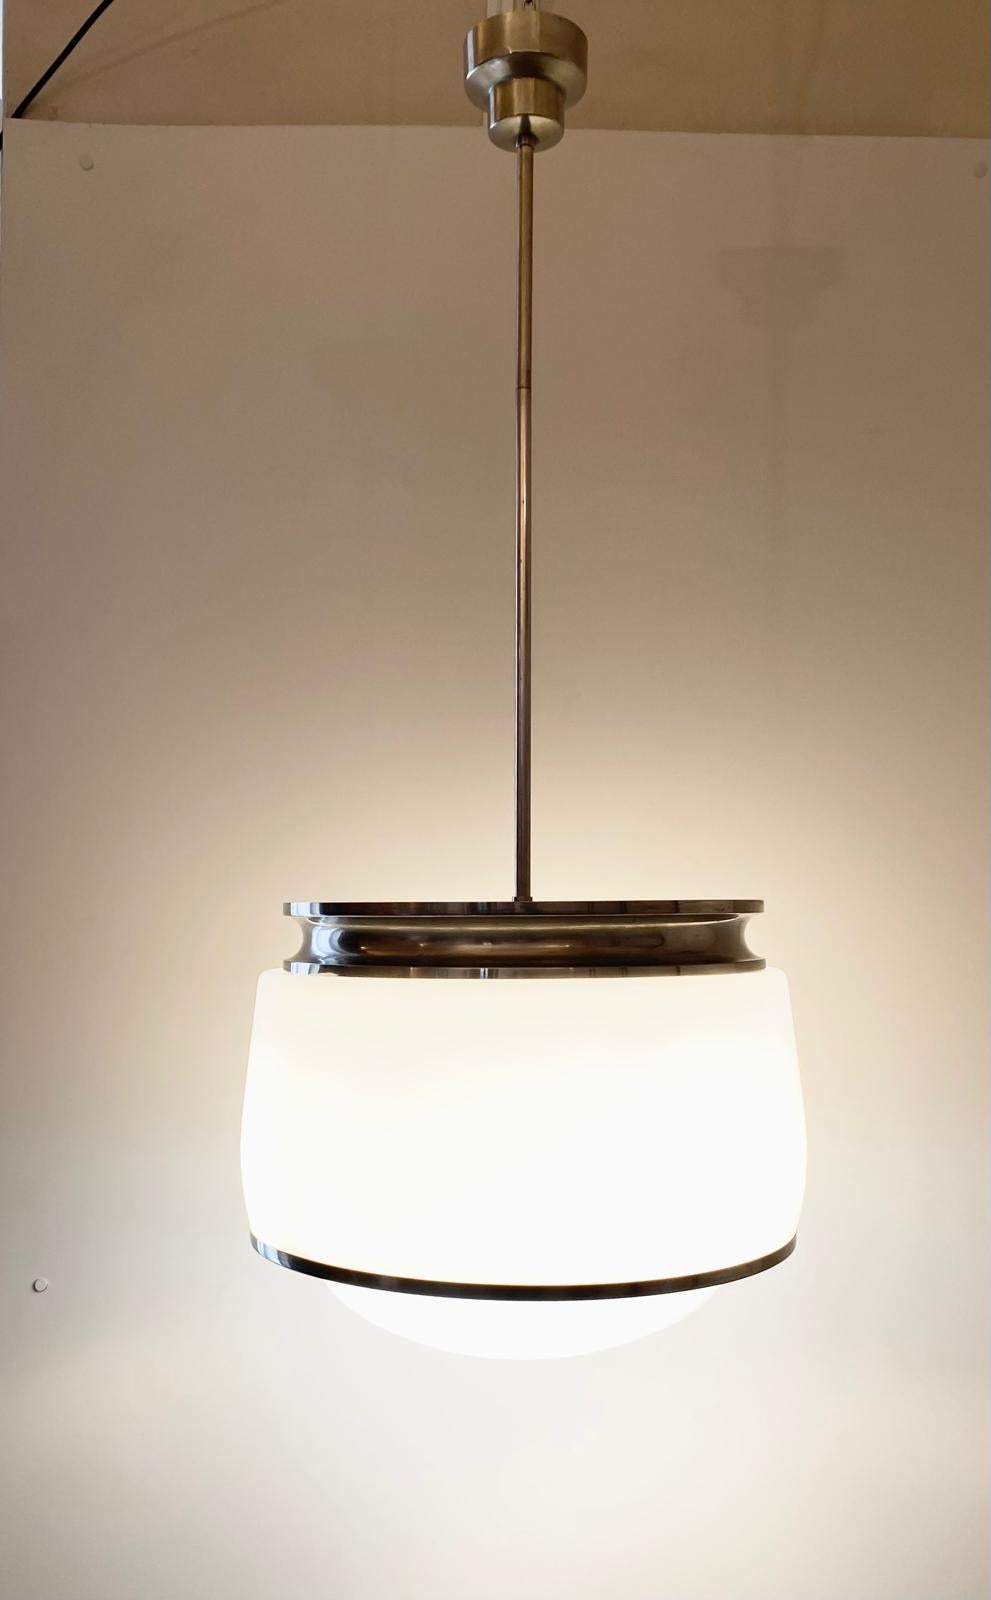 Italian Kappa ceiling pendant by Sergio Mazza Artemide, 1960
Rare stem-suspension lamp in matte nickel-plated brass, designed by Sergio Mazza for Artemide, dating to 1960. Upper shade in white opal glass and lower shade in pressed crystal, with